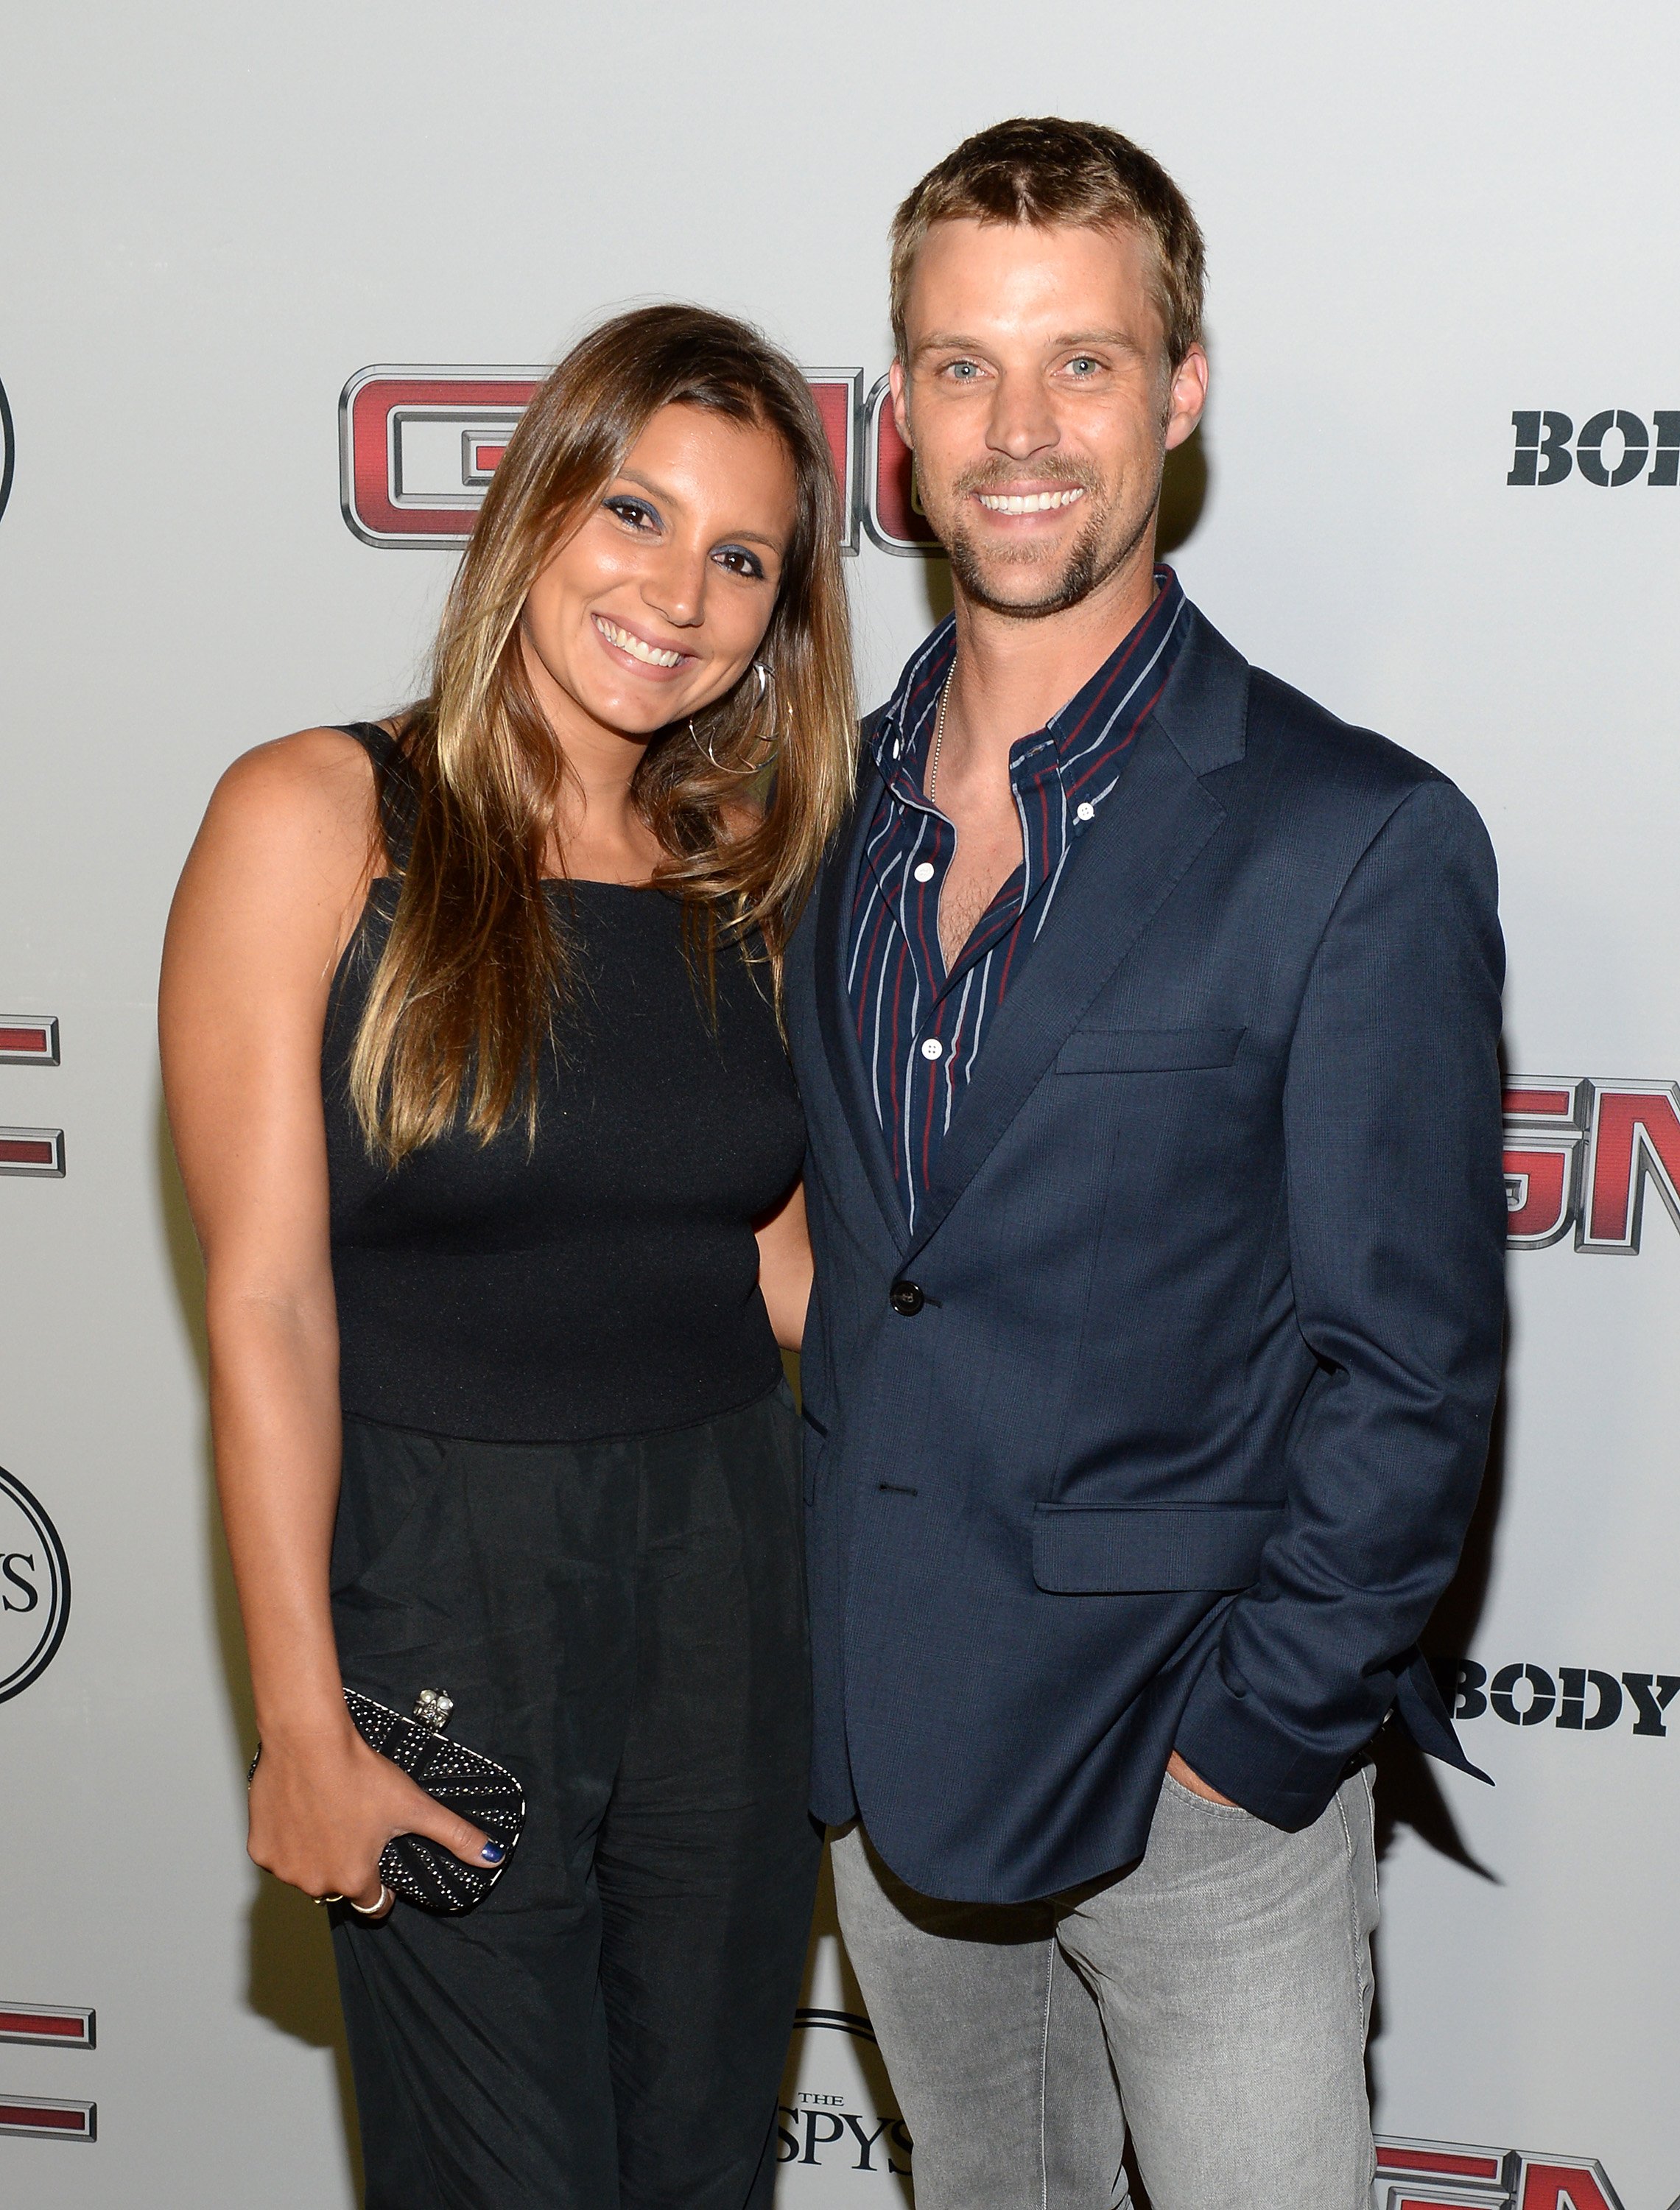 Maya Gabeira and Jesse Spencer at the ESPN Magazine's 5th annual "Body Issue" party on July 16, 2013, in Hollywood, California. | Source: Getty Images